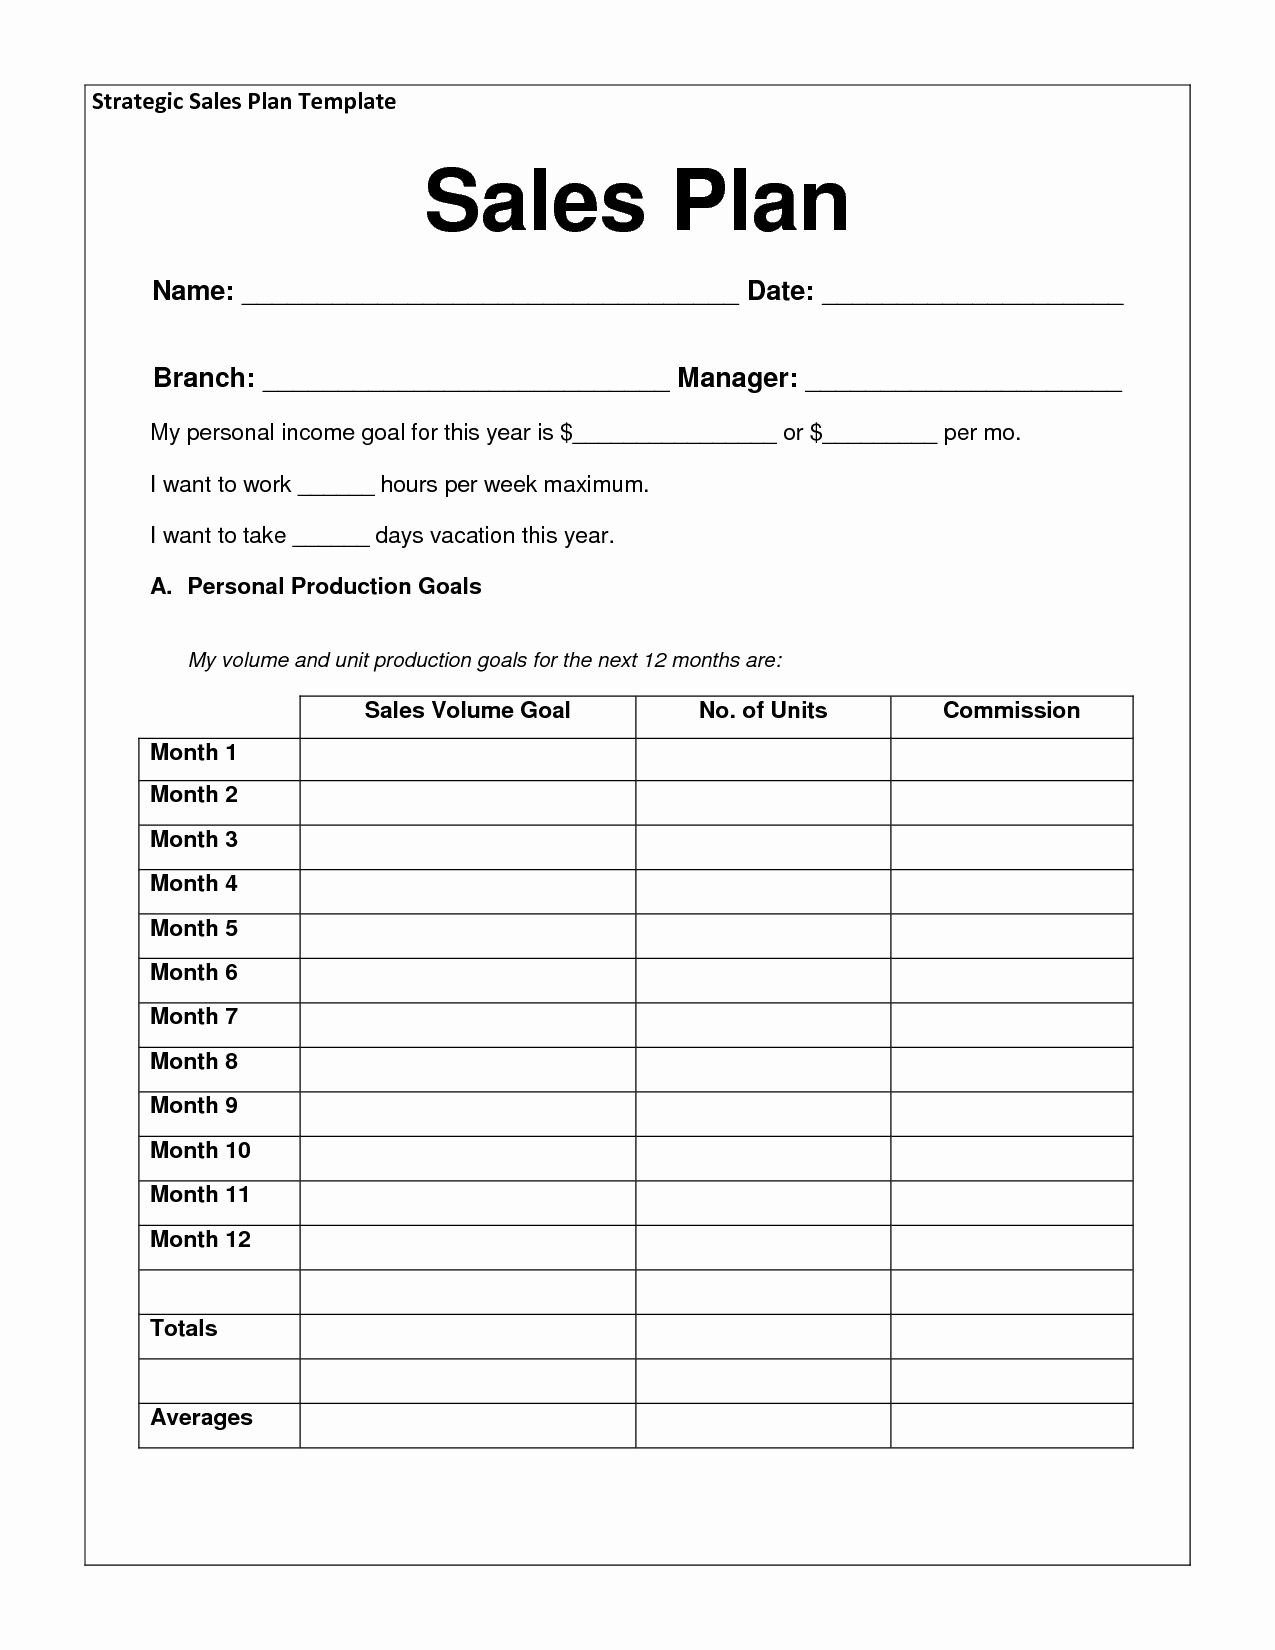 Sales Territory Planning Template Unique Sales Plan Templates Word Excel Samples